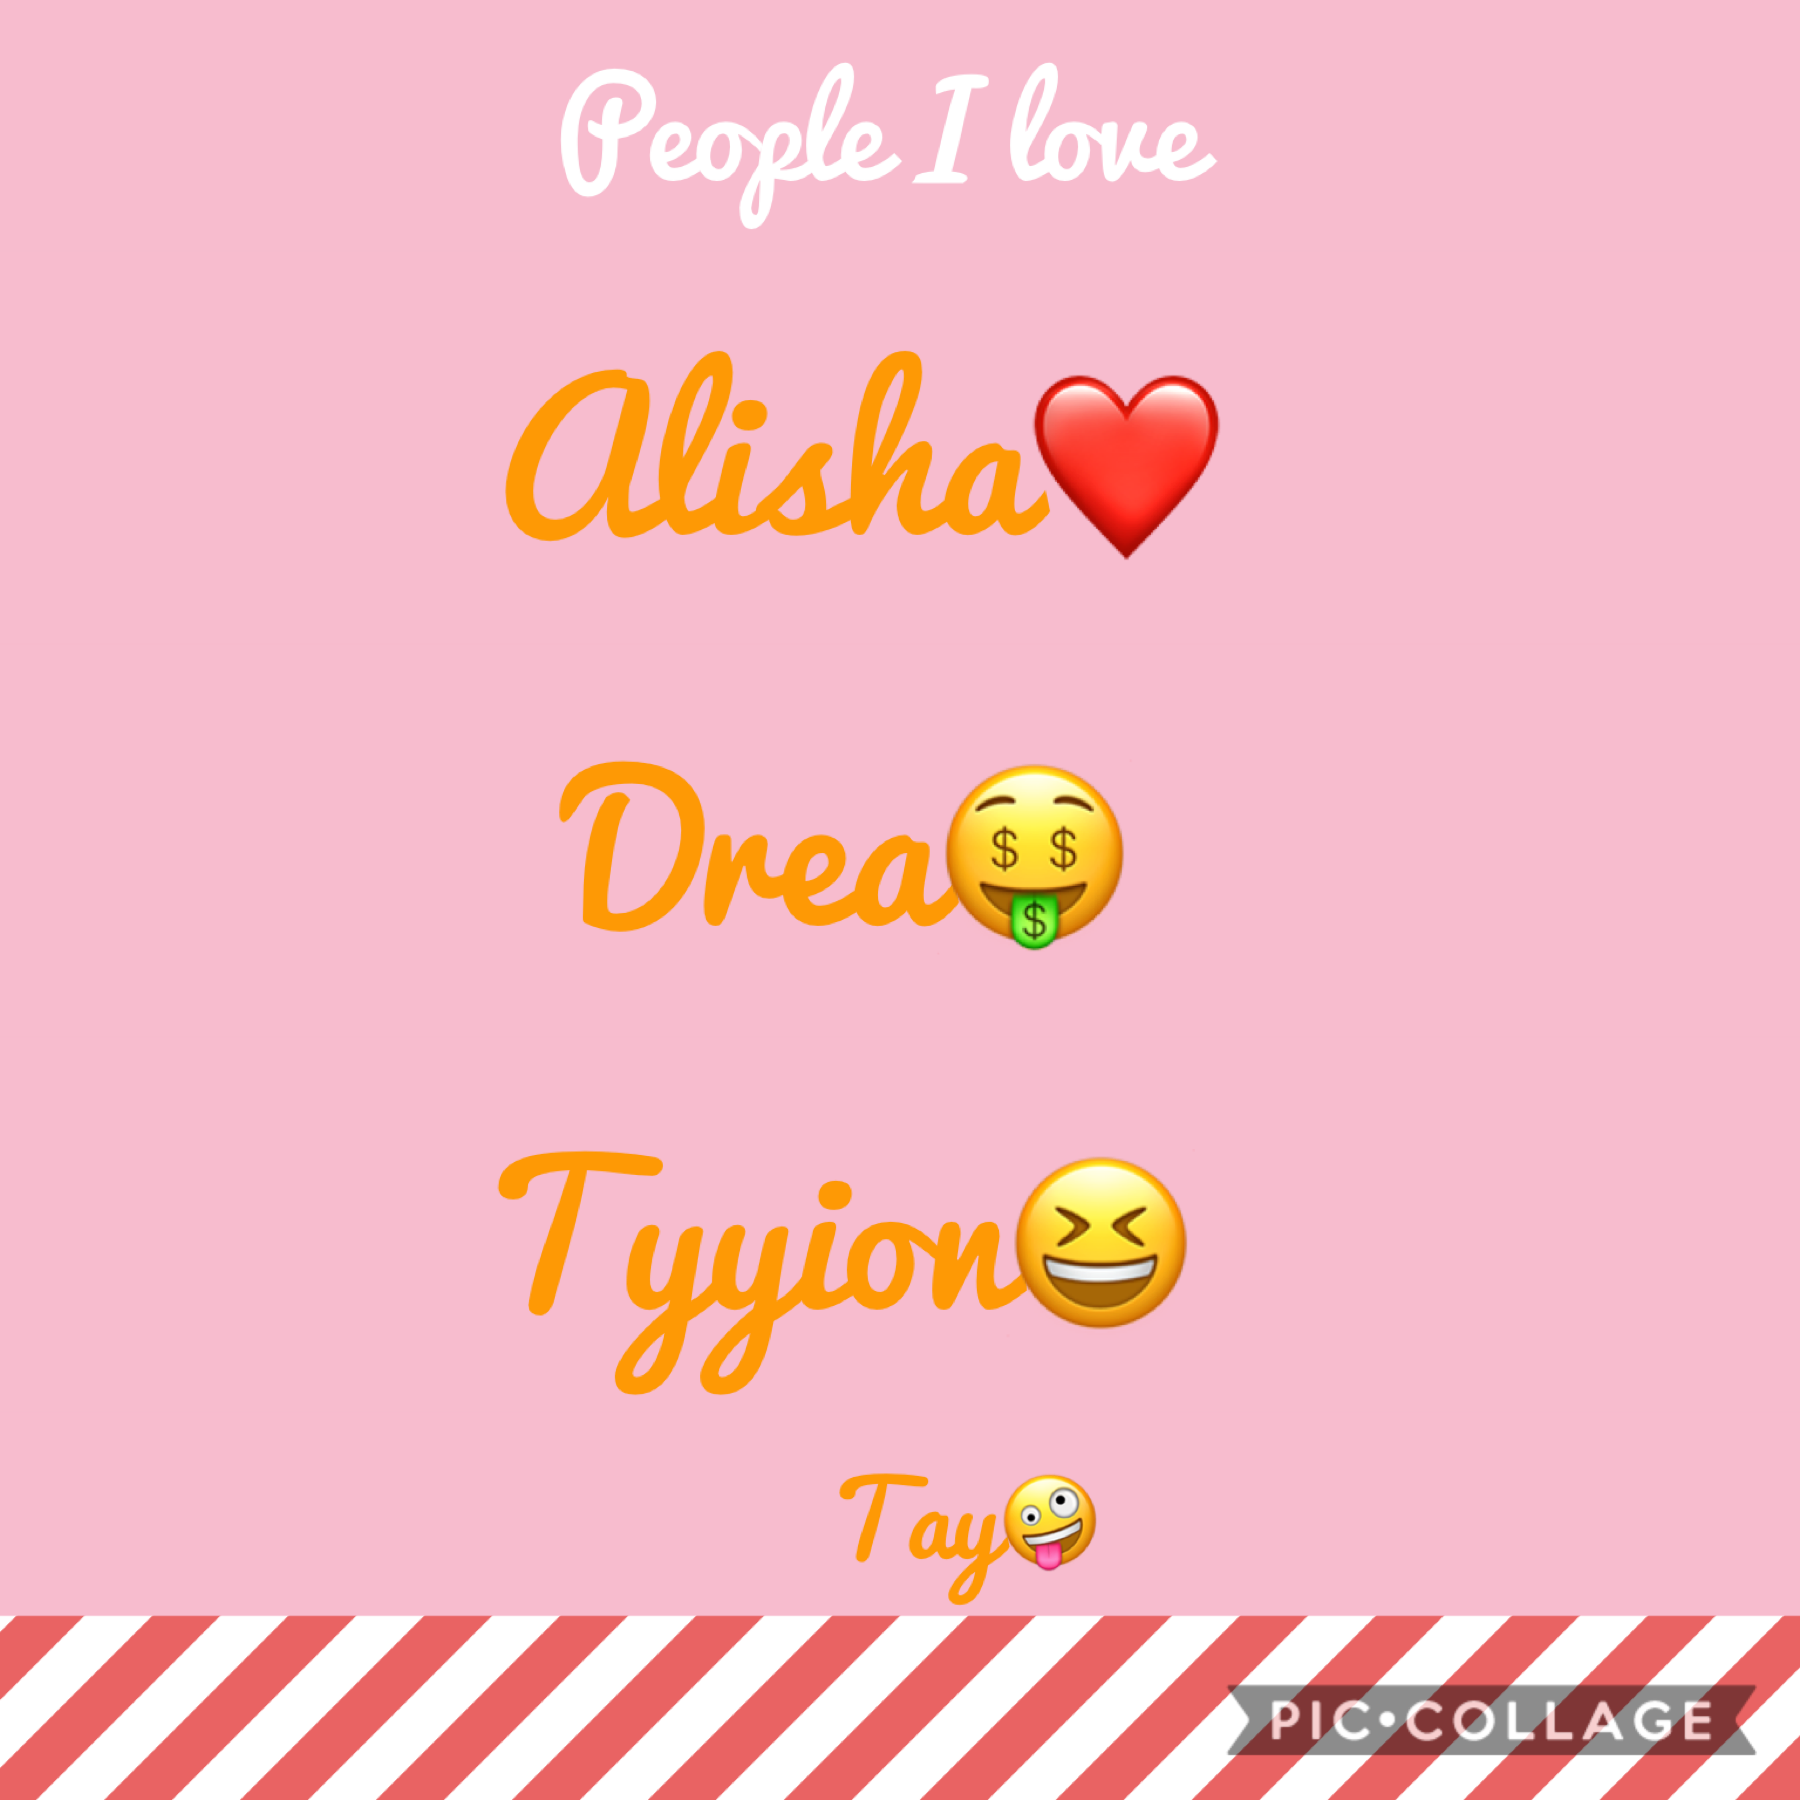 I love all these people as friends and the one with the heart(alisha) is my girl friend 